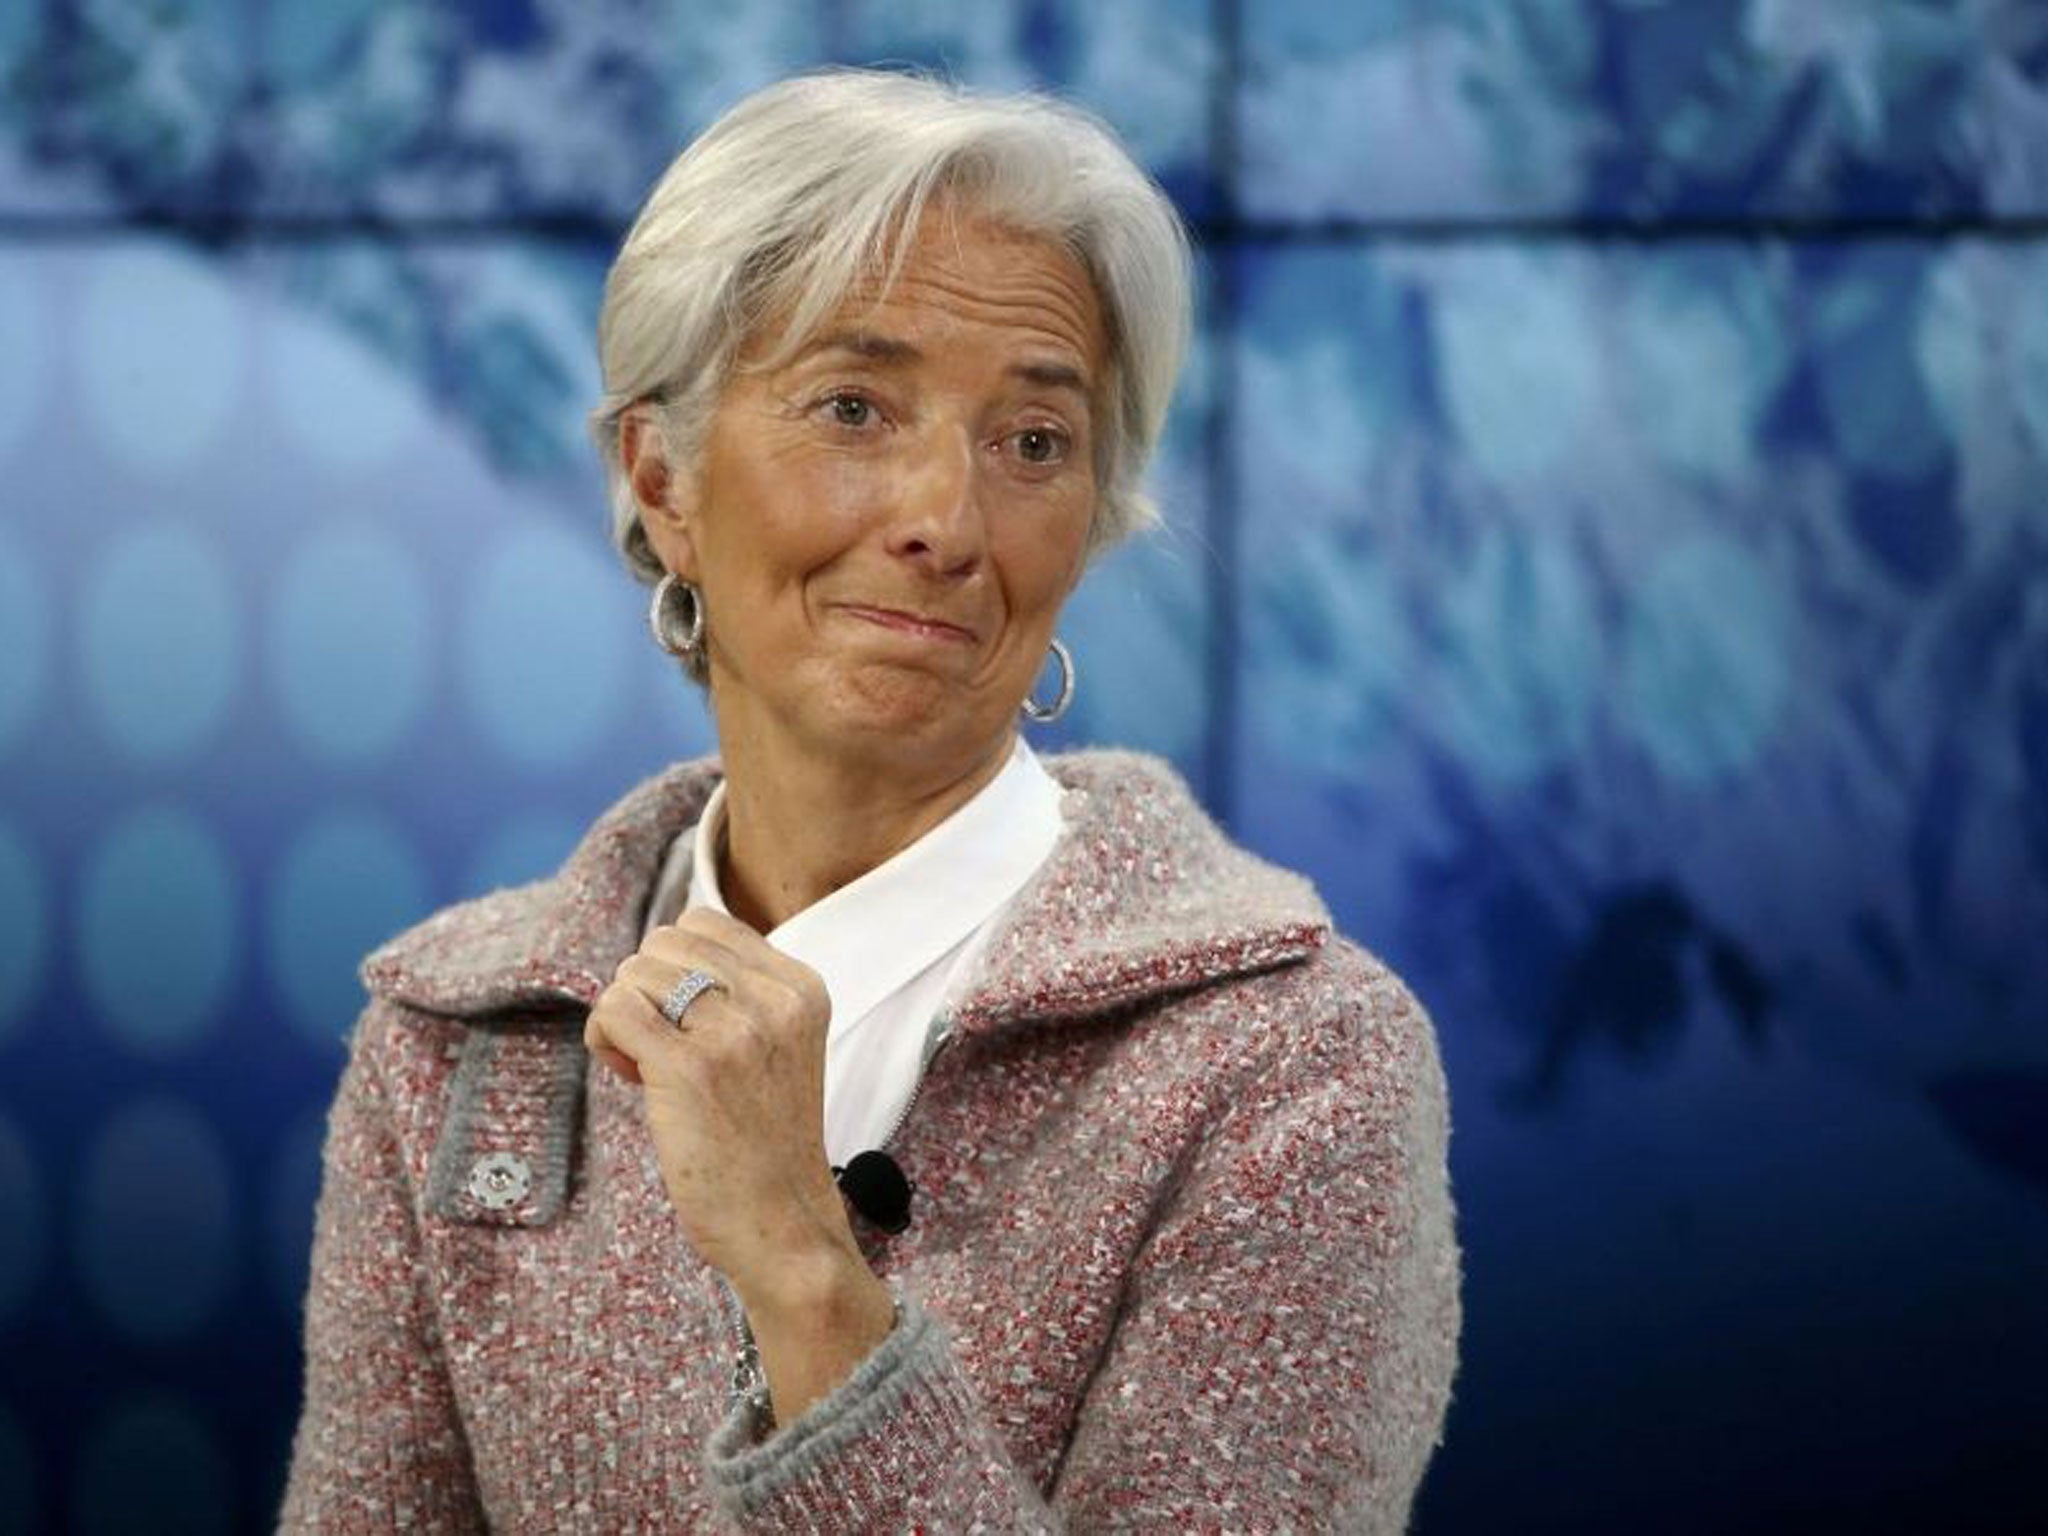 Christine Lagarde, Managing Director of the International Monetary Fund (IMF) reacts during the session "The BBC World Debate: A Richer World, but for Whom?" in the Swiss mountain resort of Davos on 23 January, 2015